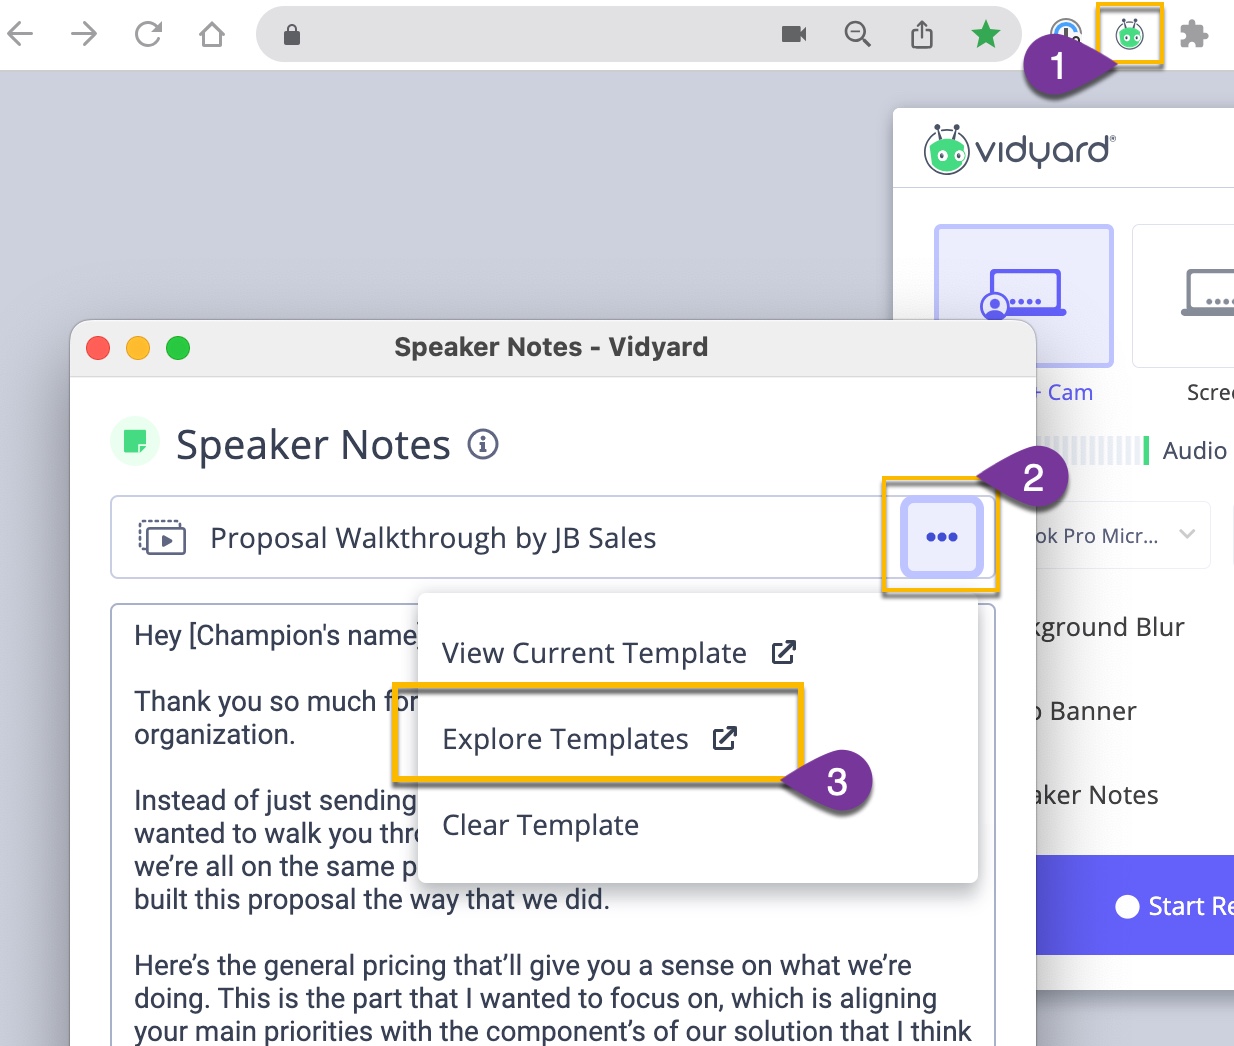 Template menu in speaker notes open and option to explore templates selected